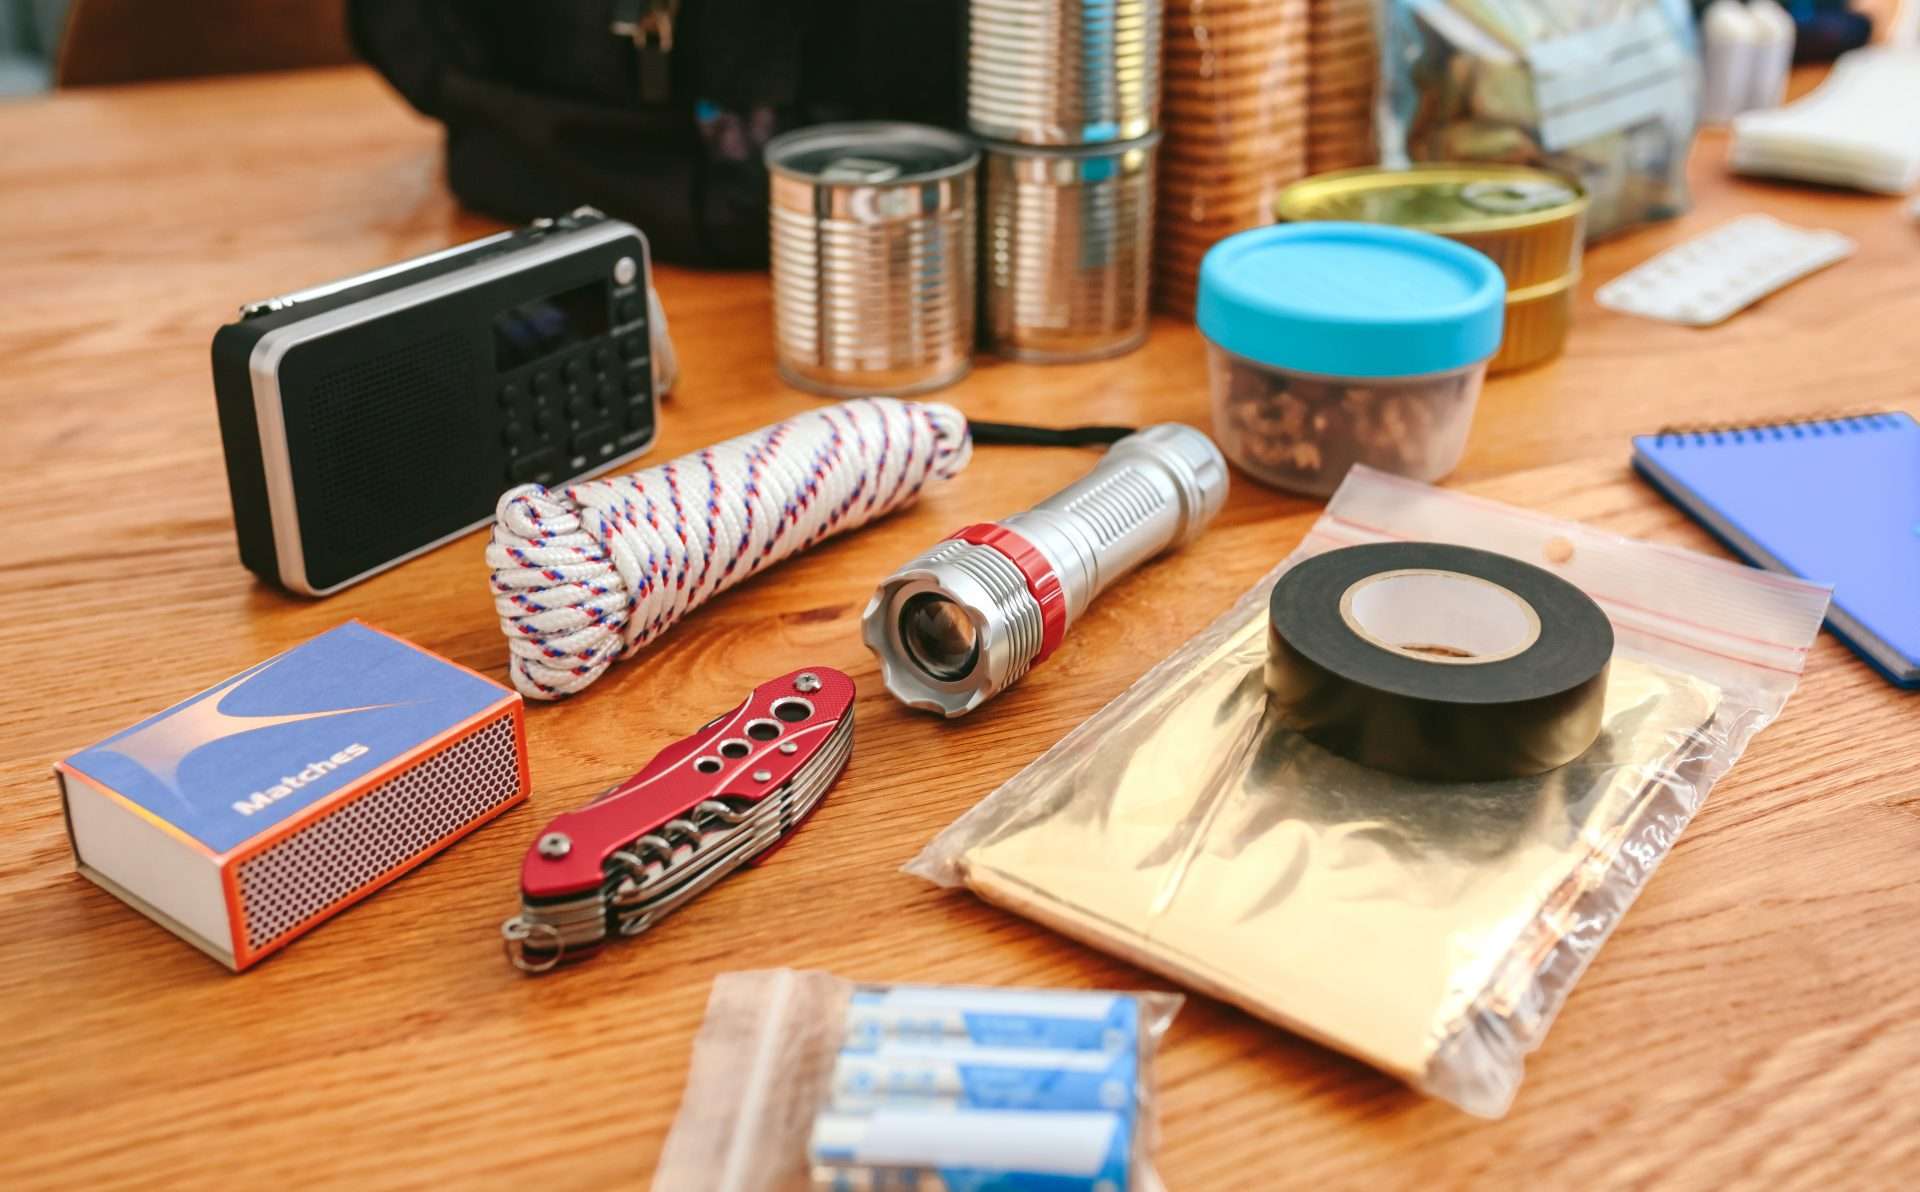 Gear to be put in survival bag